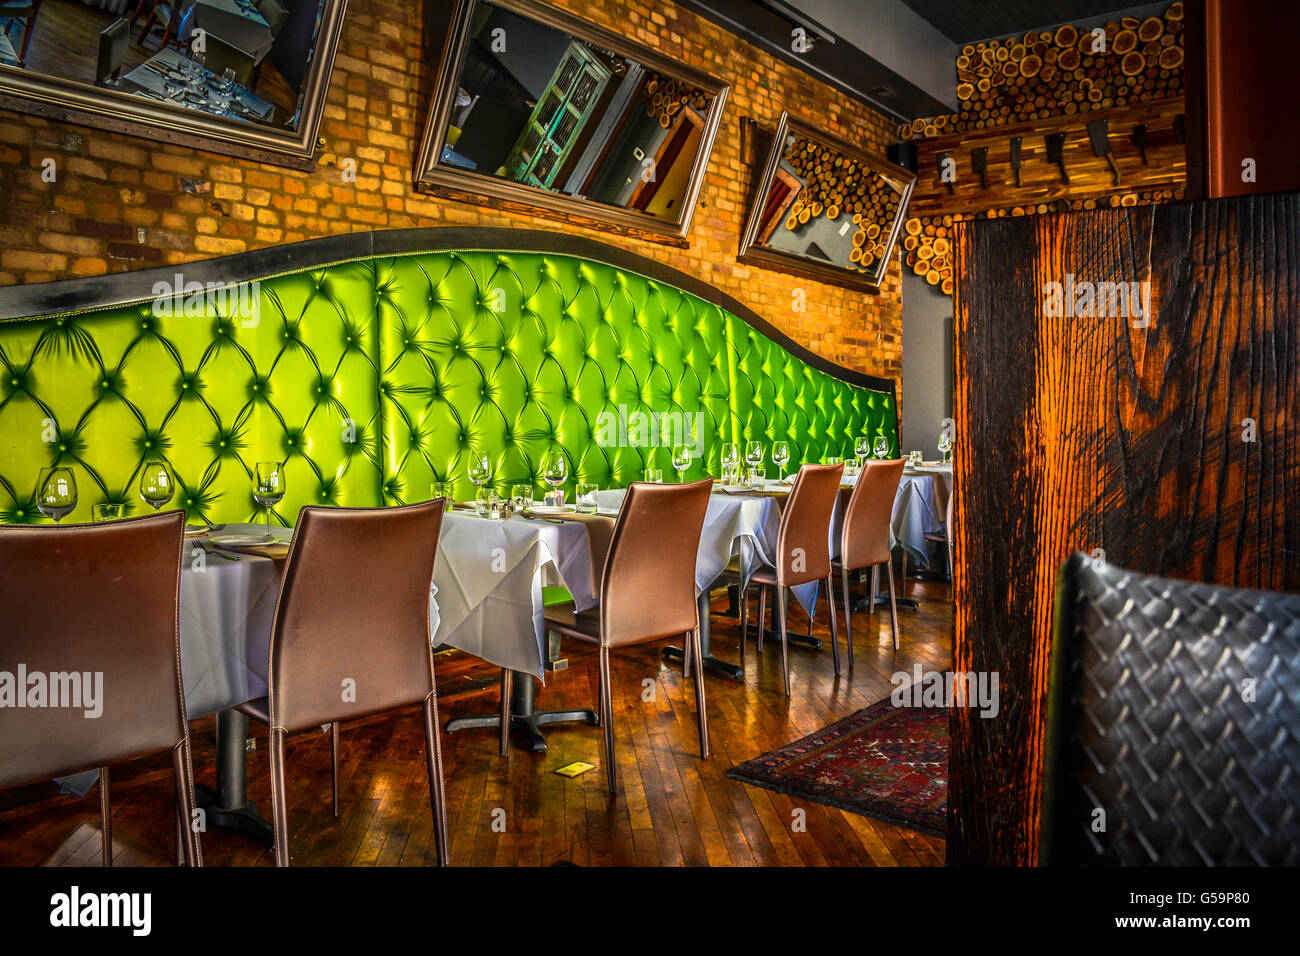 The posh lime green upholstered booths with brick-lined walls in Interior of the Cork & Cow Restaurant in historic Franklin, TN Stock Photo